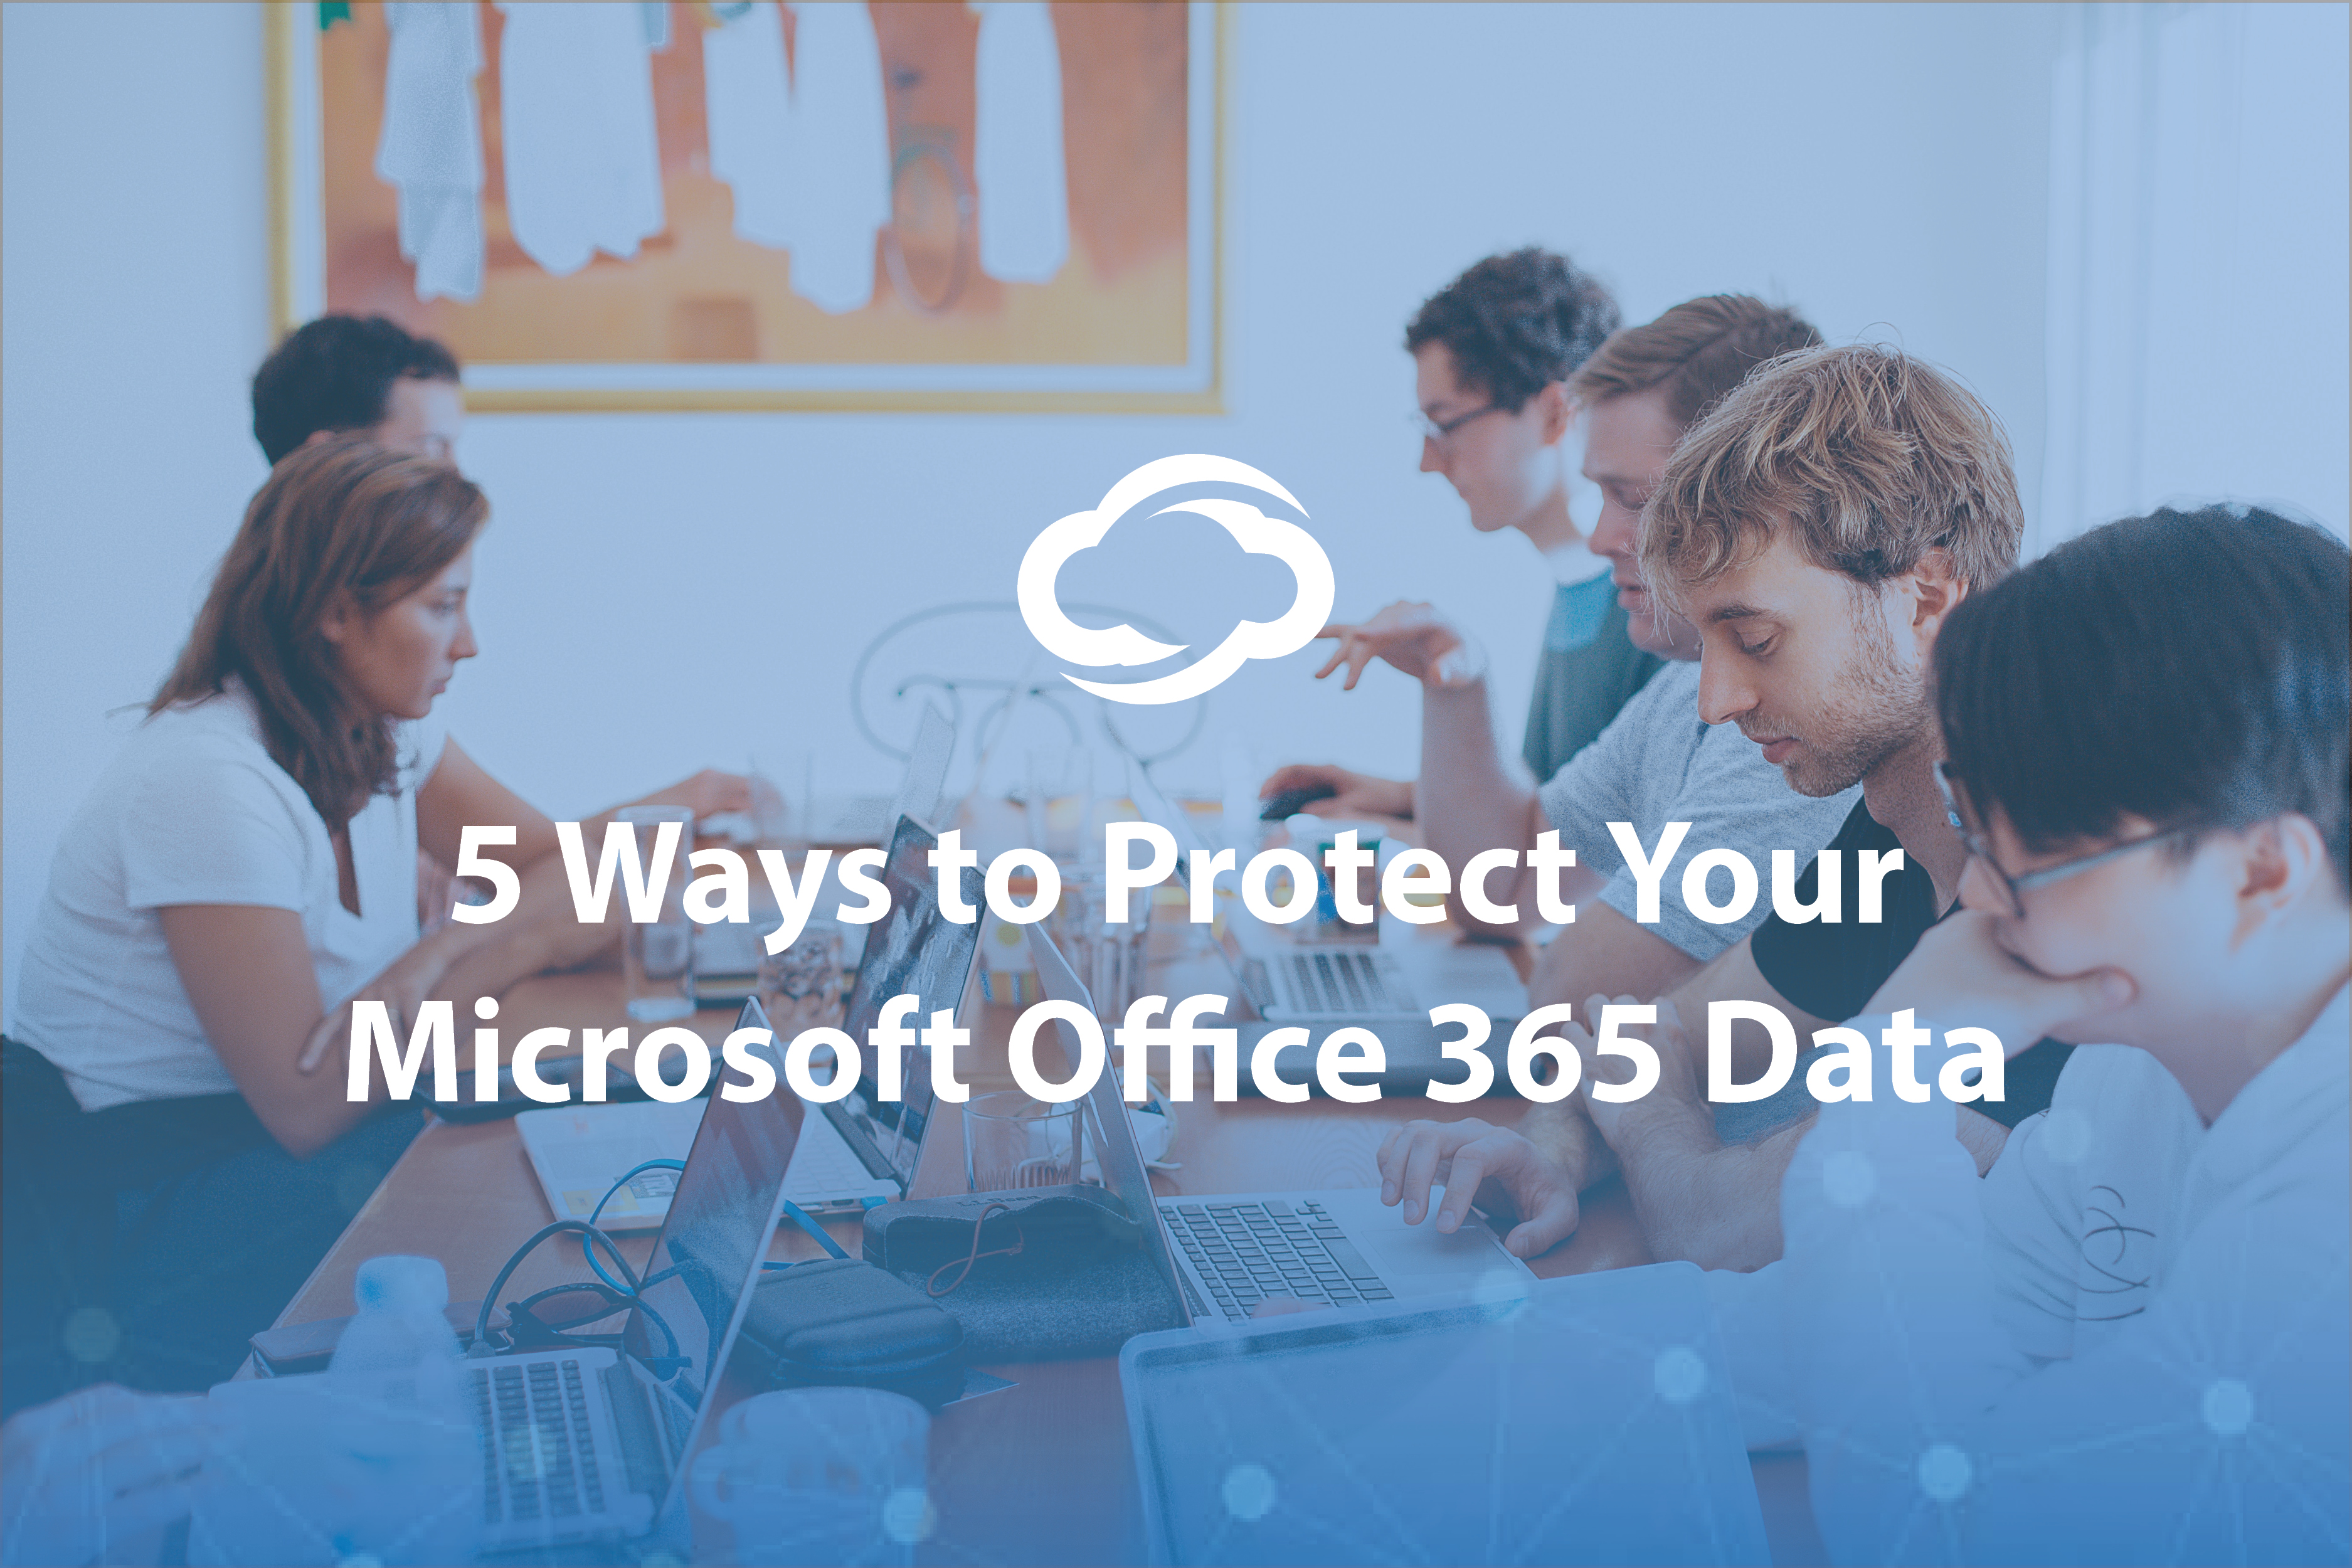 Blog Image - 5 Ways to Protect Your Microsoft Office 365 Data